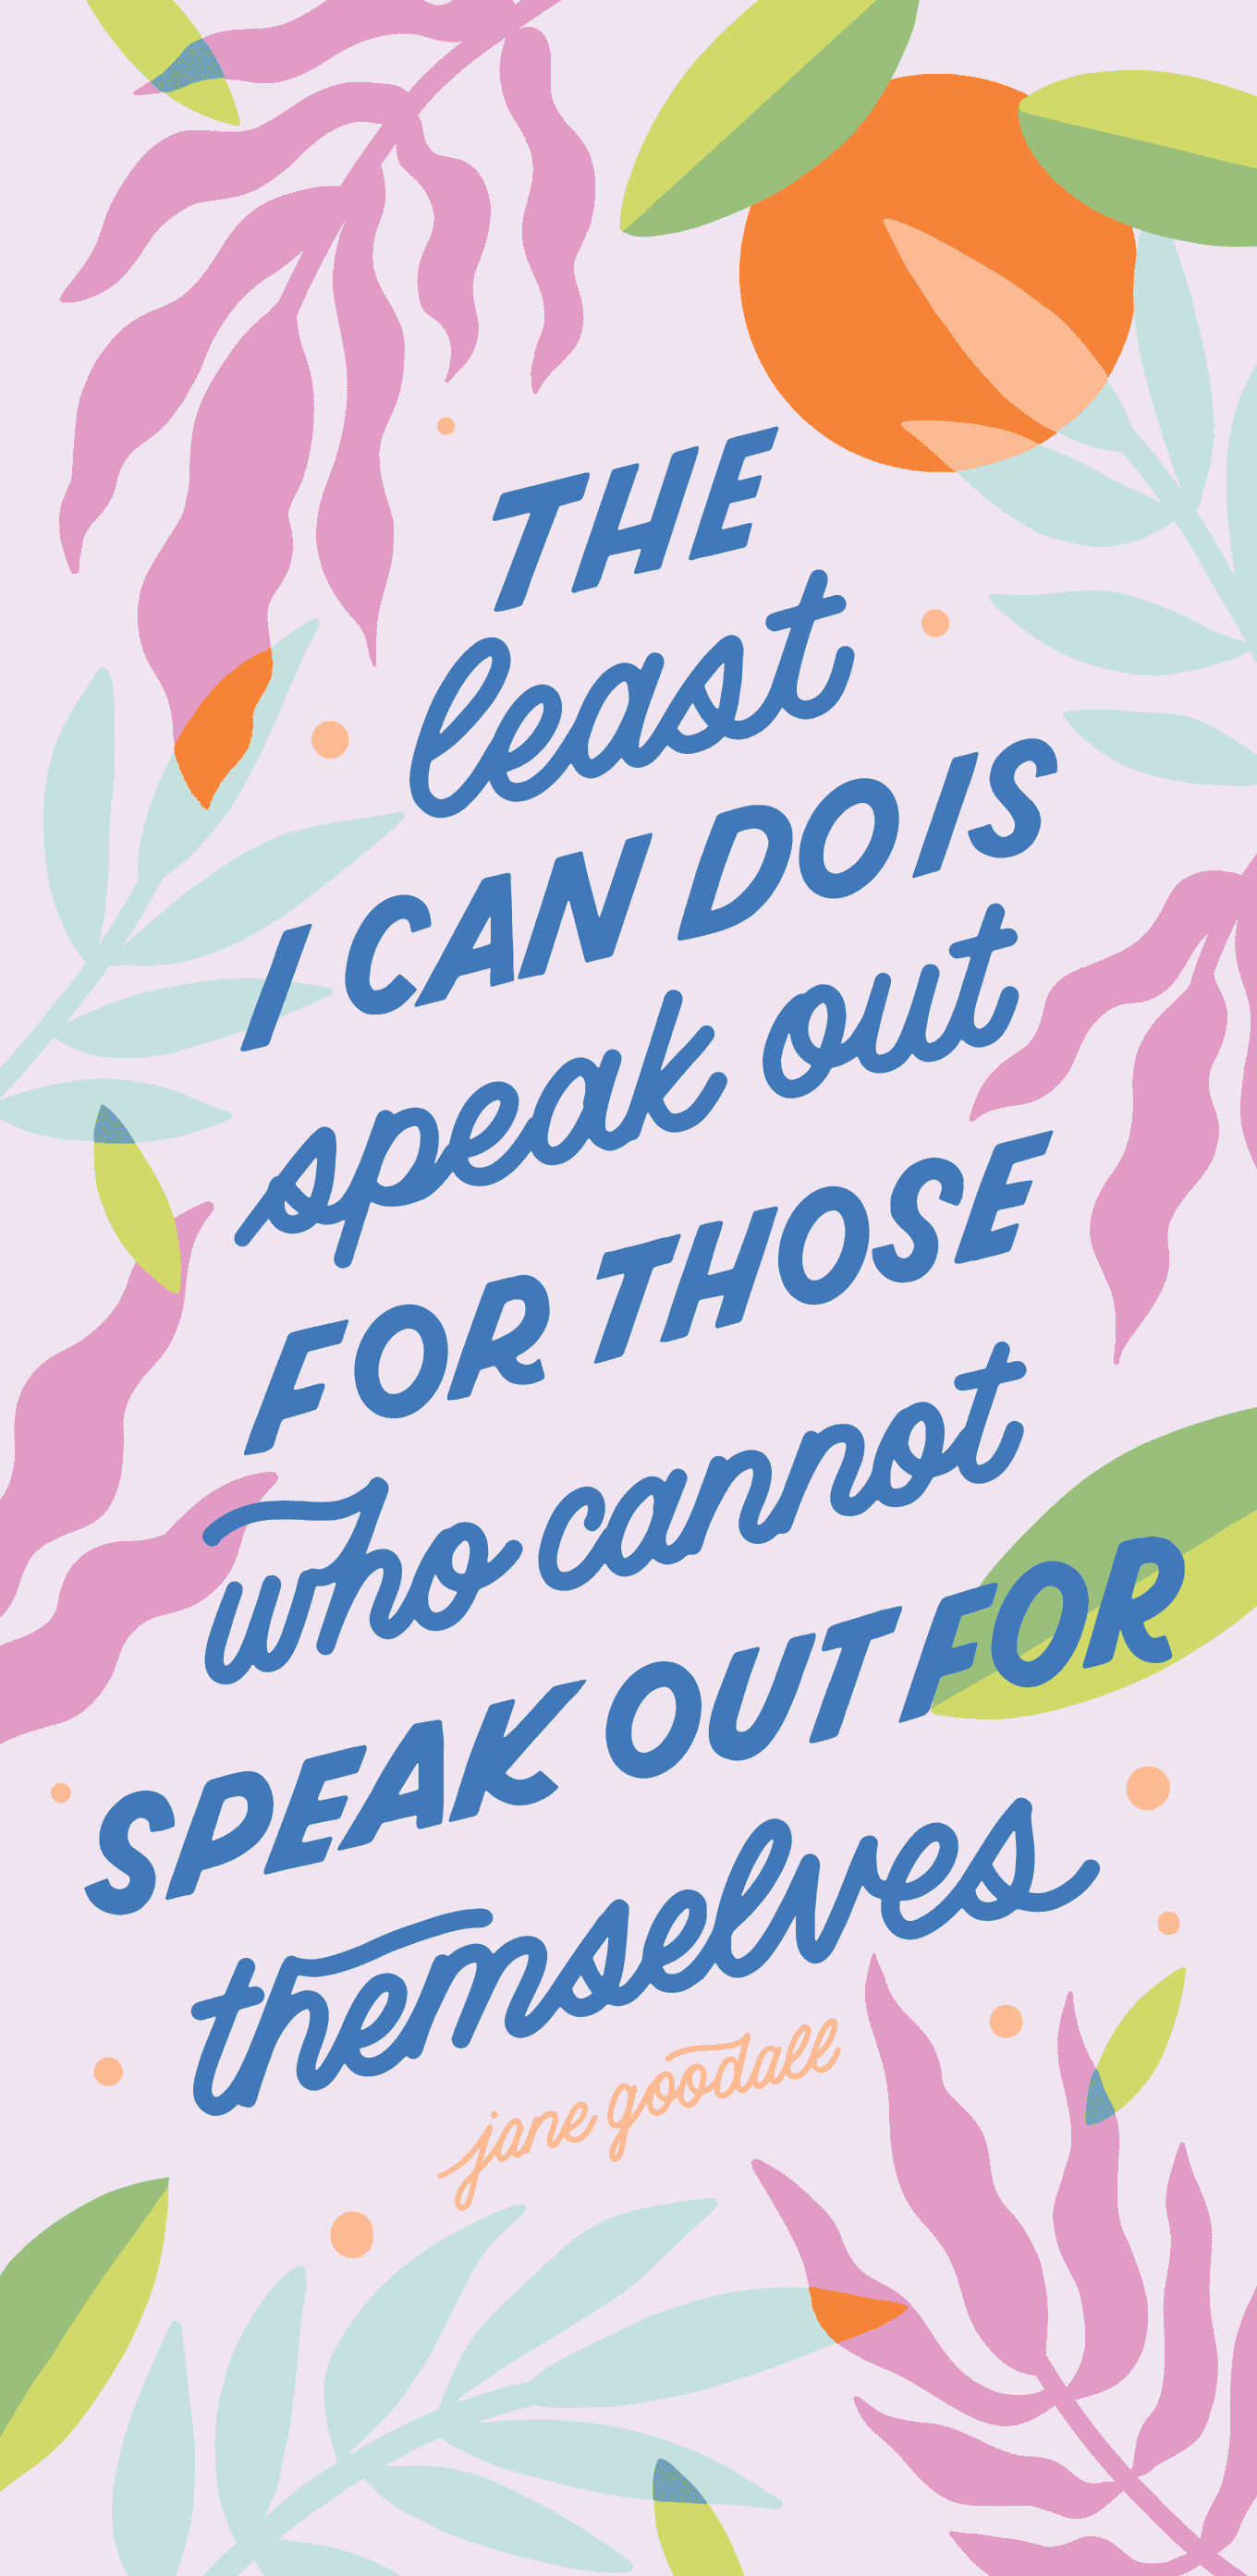 Quote poster wallpaper: “The least I can do is speak out for those who cannot speak for themselves.” — Jane Goodall